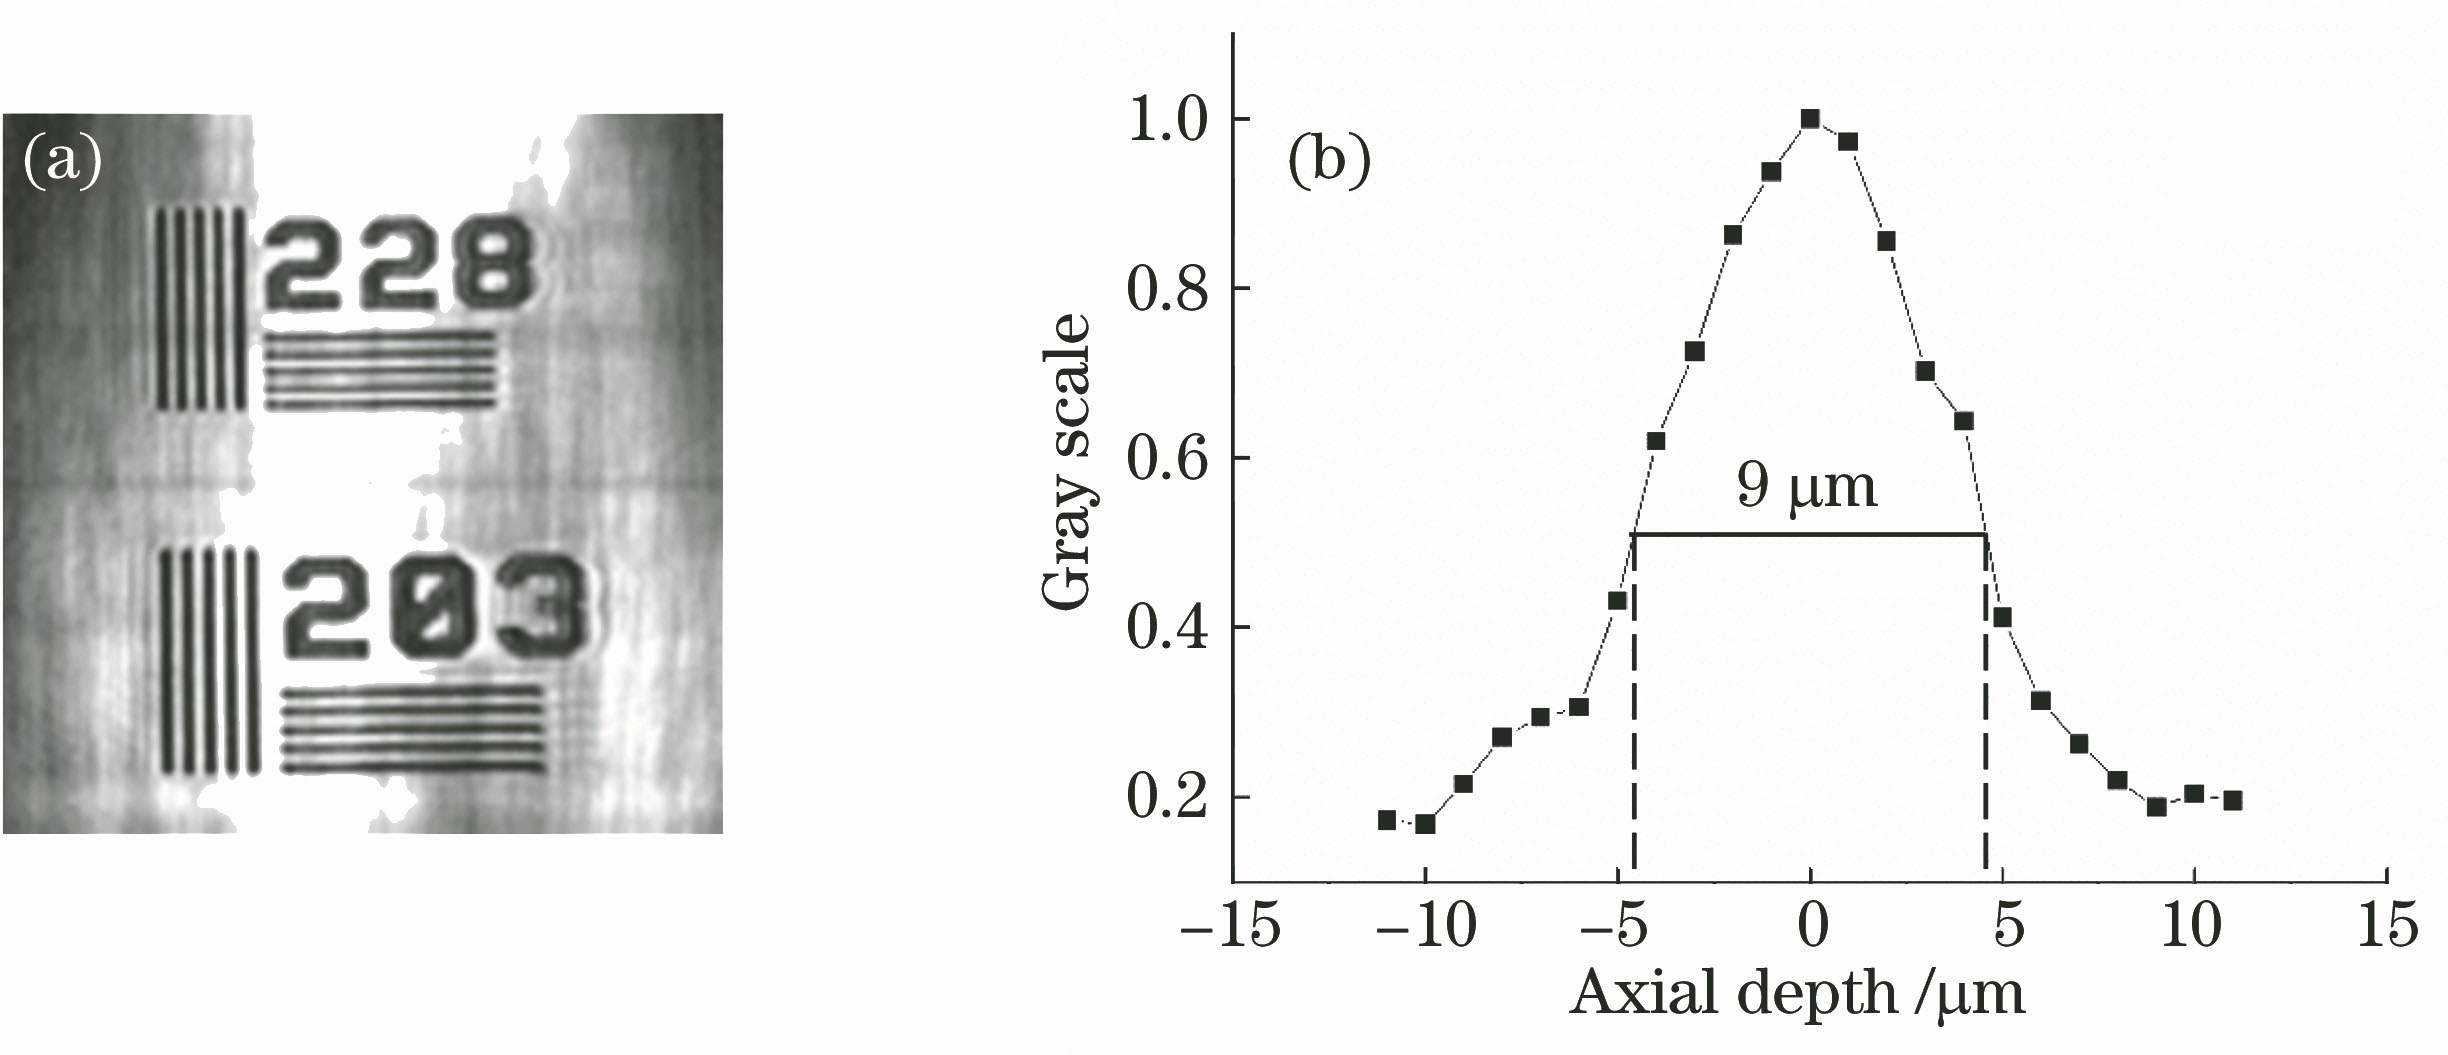 Detection results of (a) lateral resolution[8] and (b) axial resolution[8]